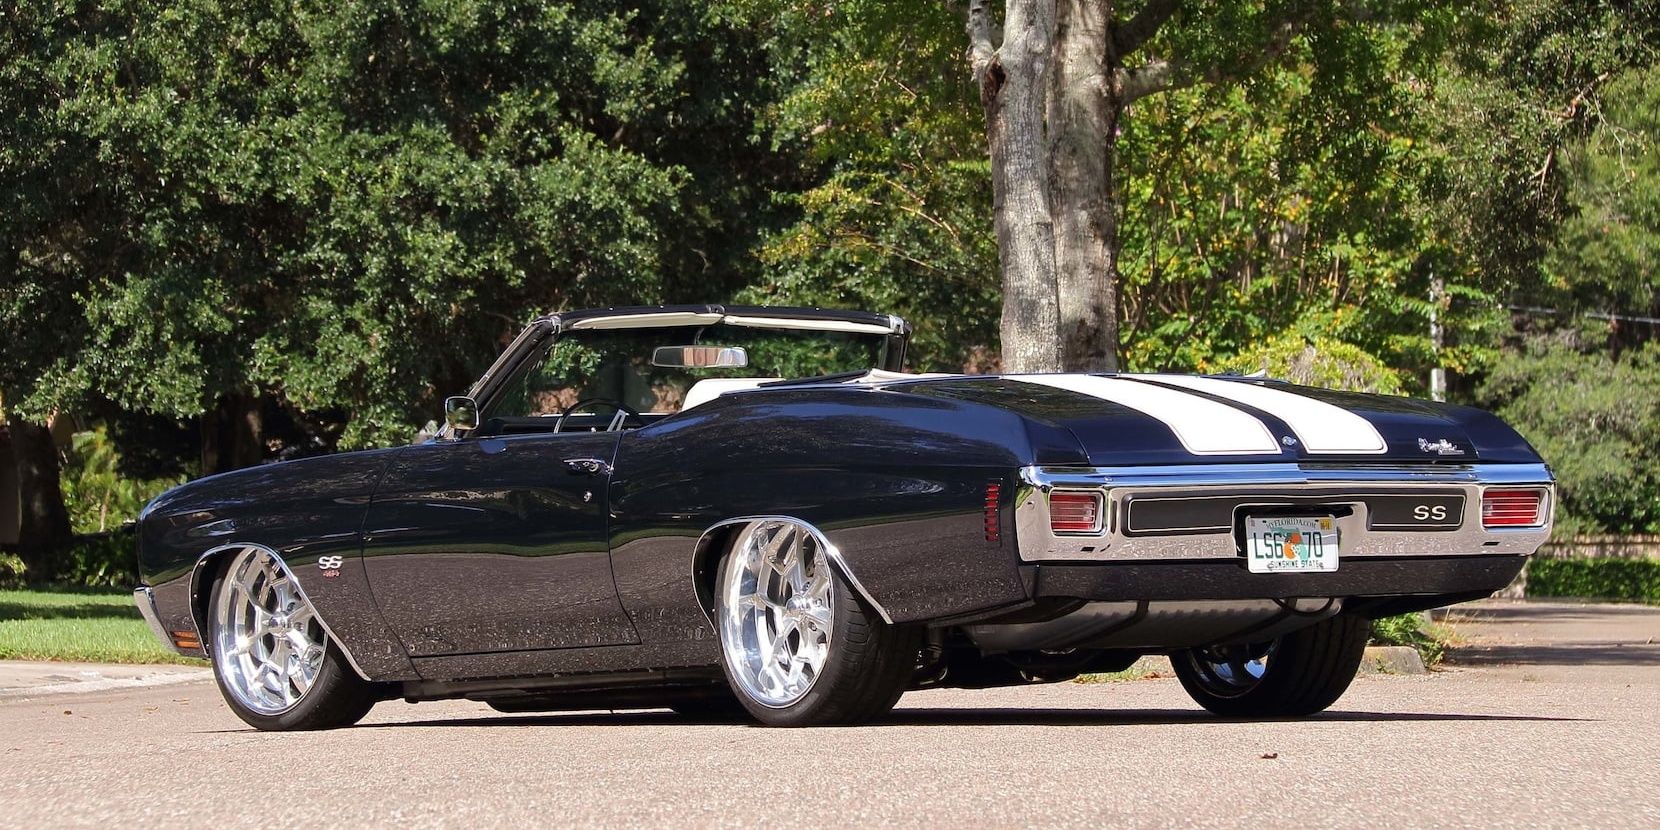 1970 Chevrolet Chevelle SS on the road